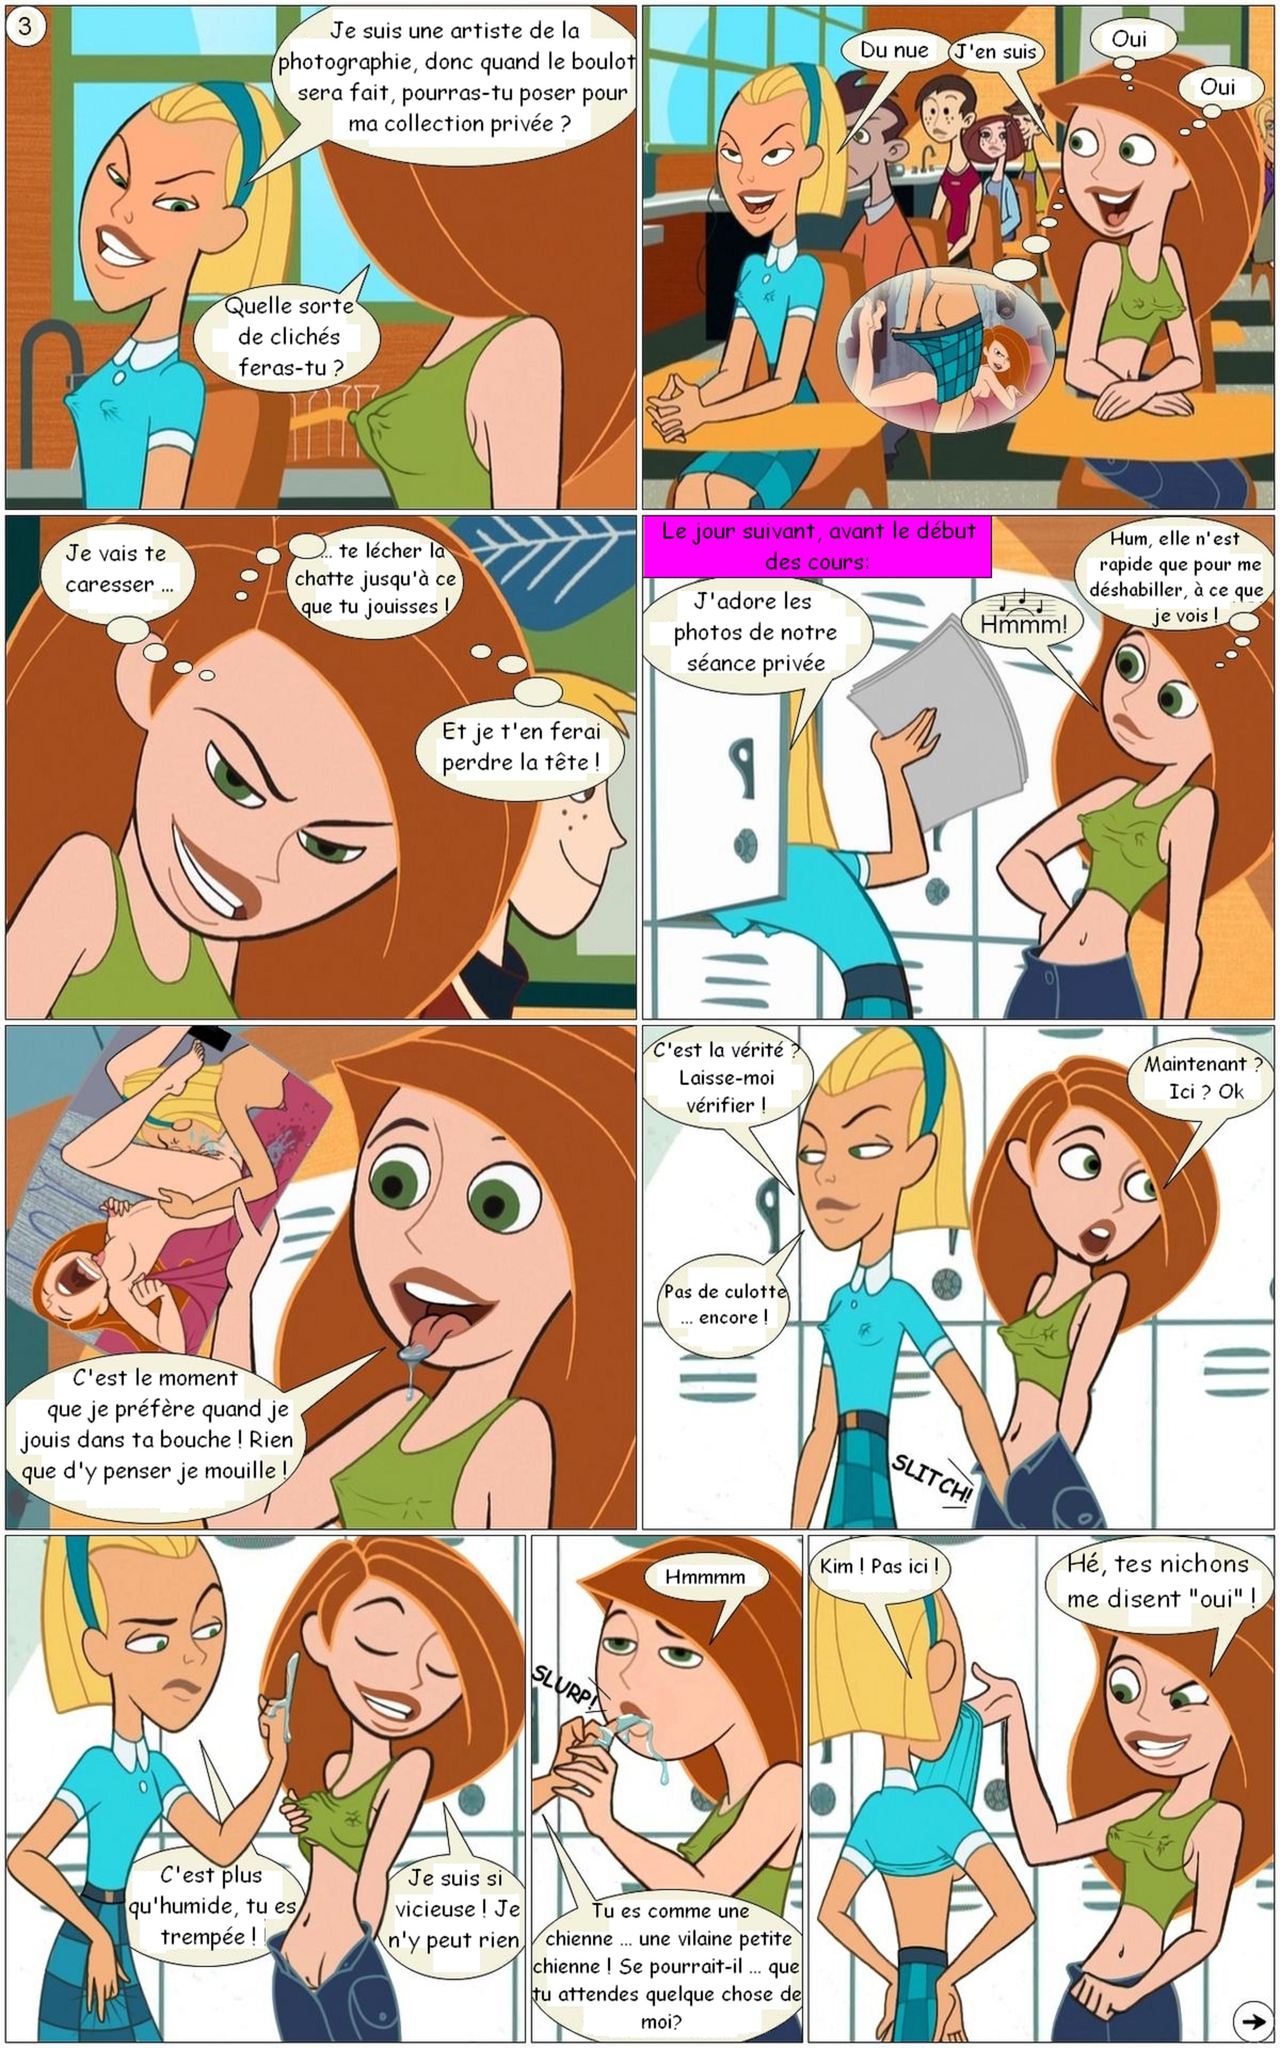 [Gagala] Photography Class (Kim Possible) [French] 